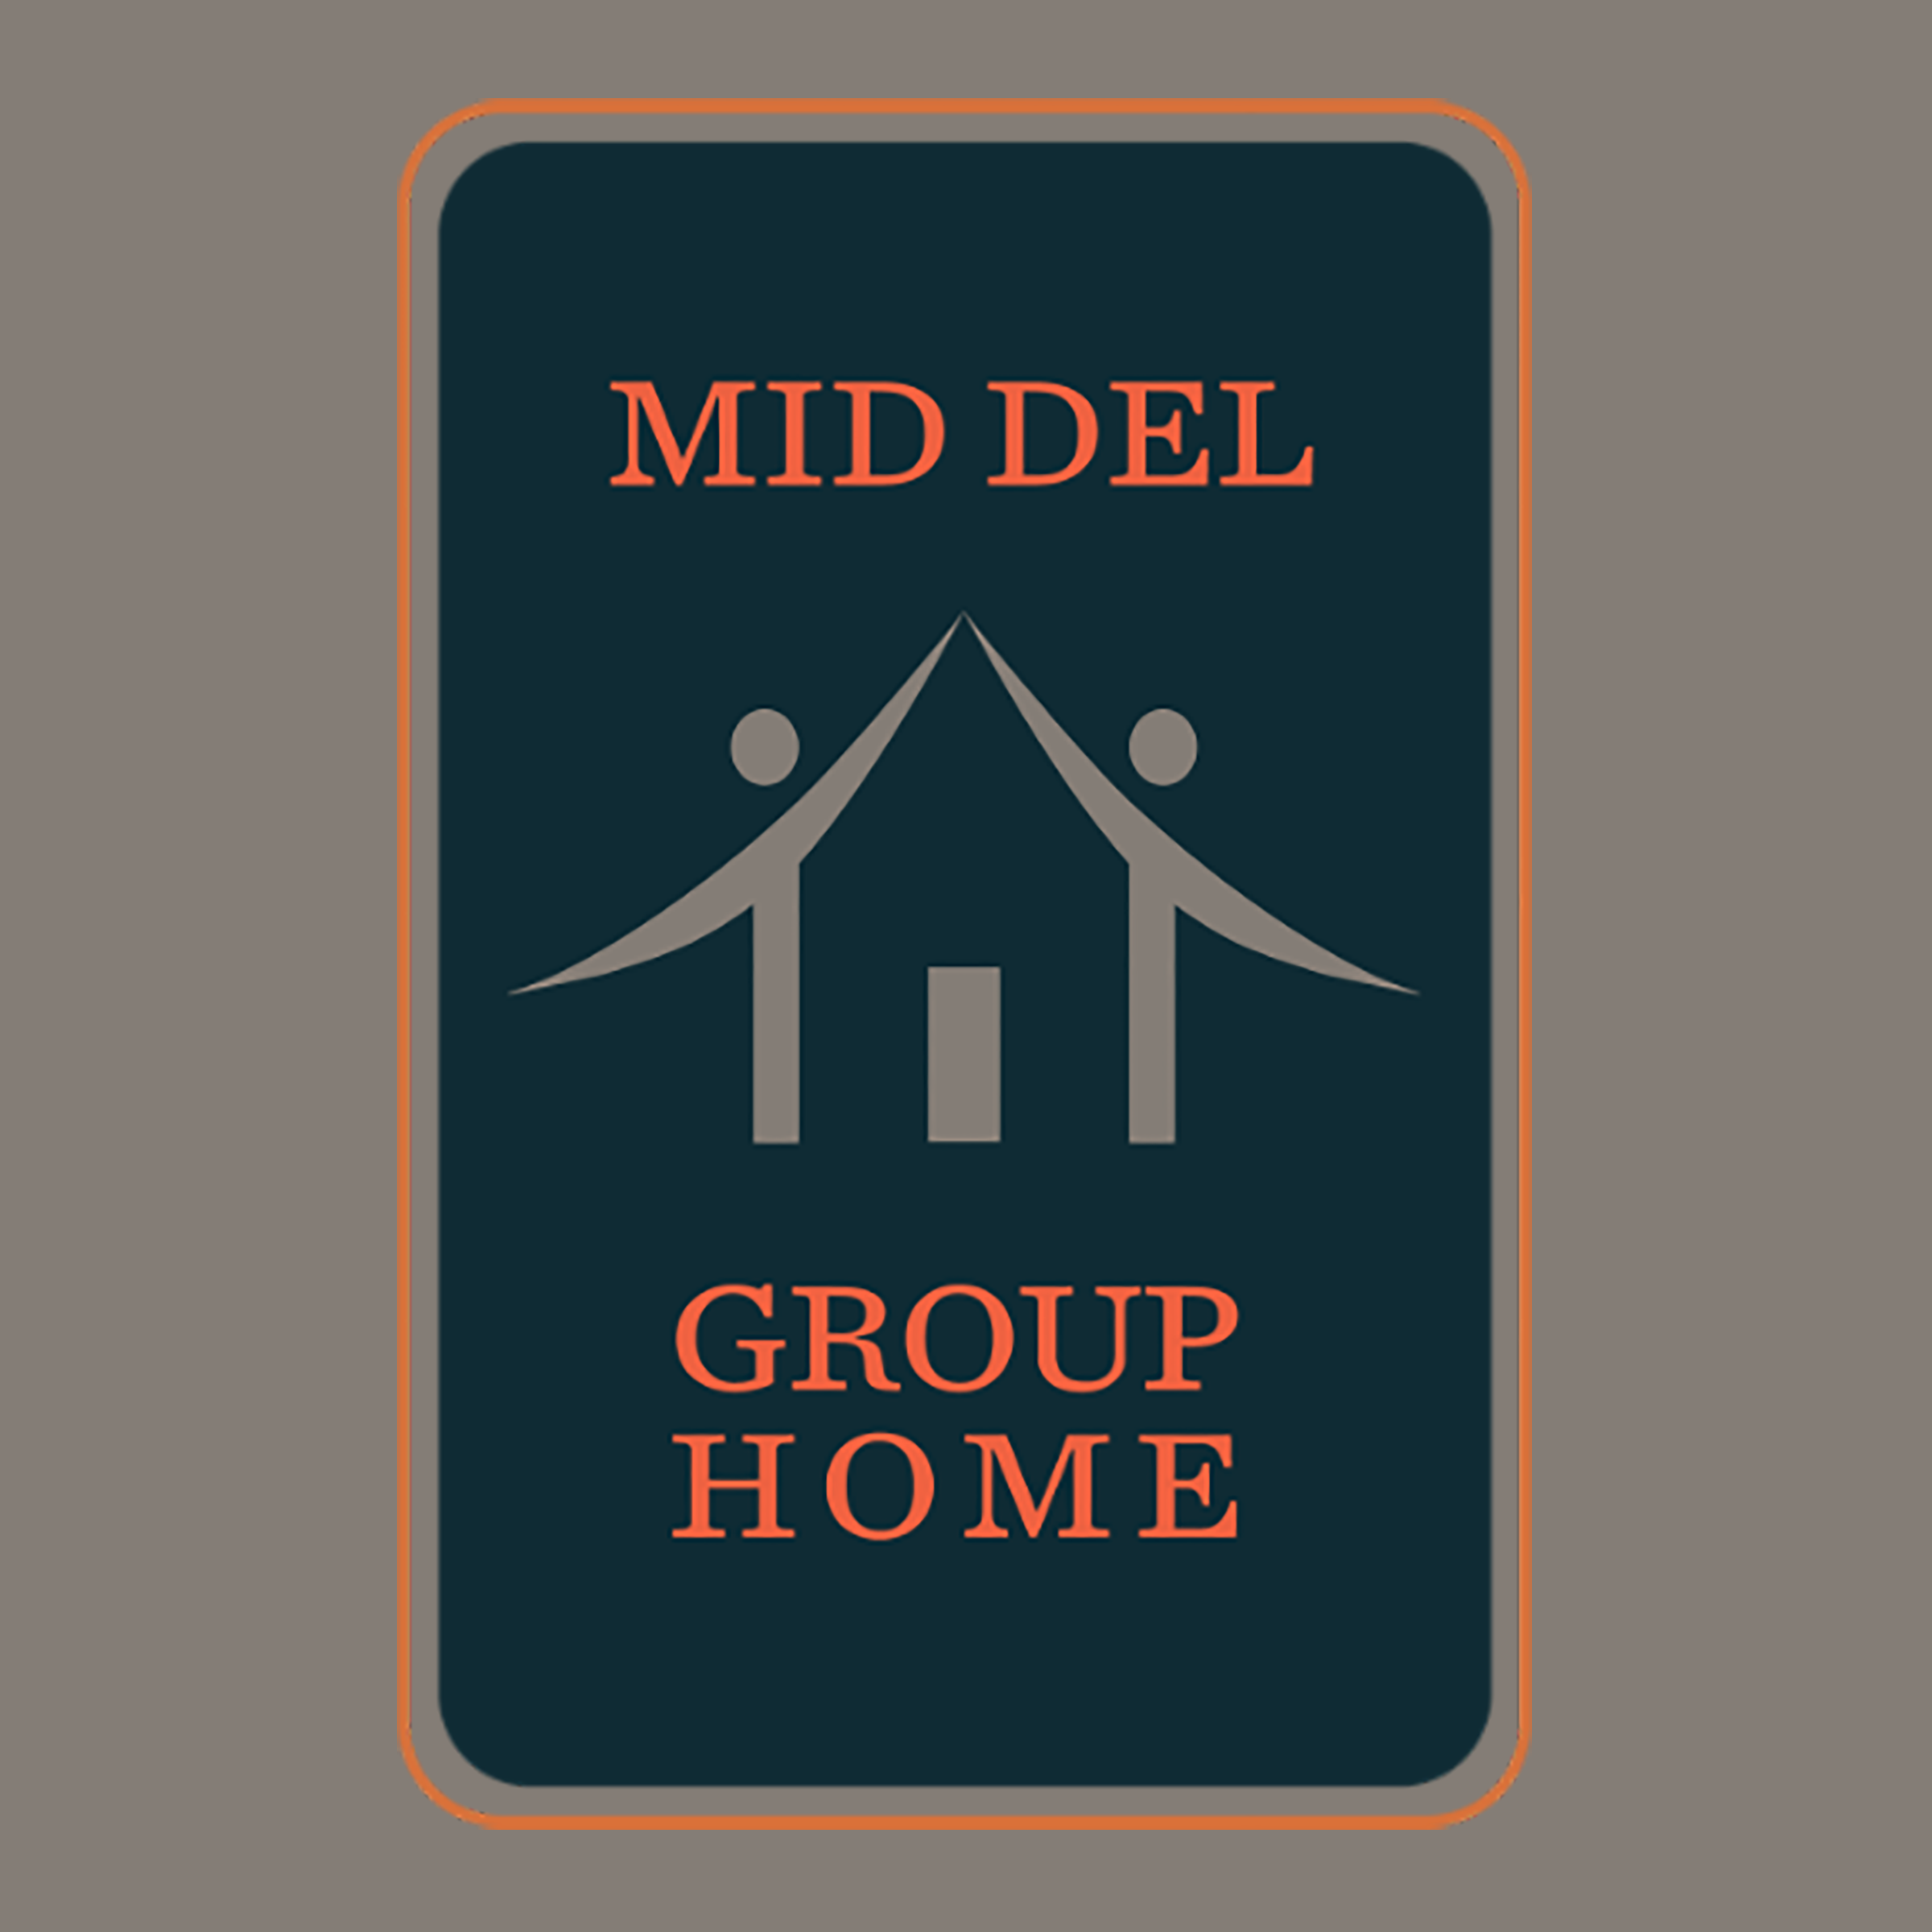 Mid-Del Group Home logo